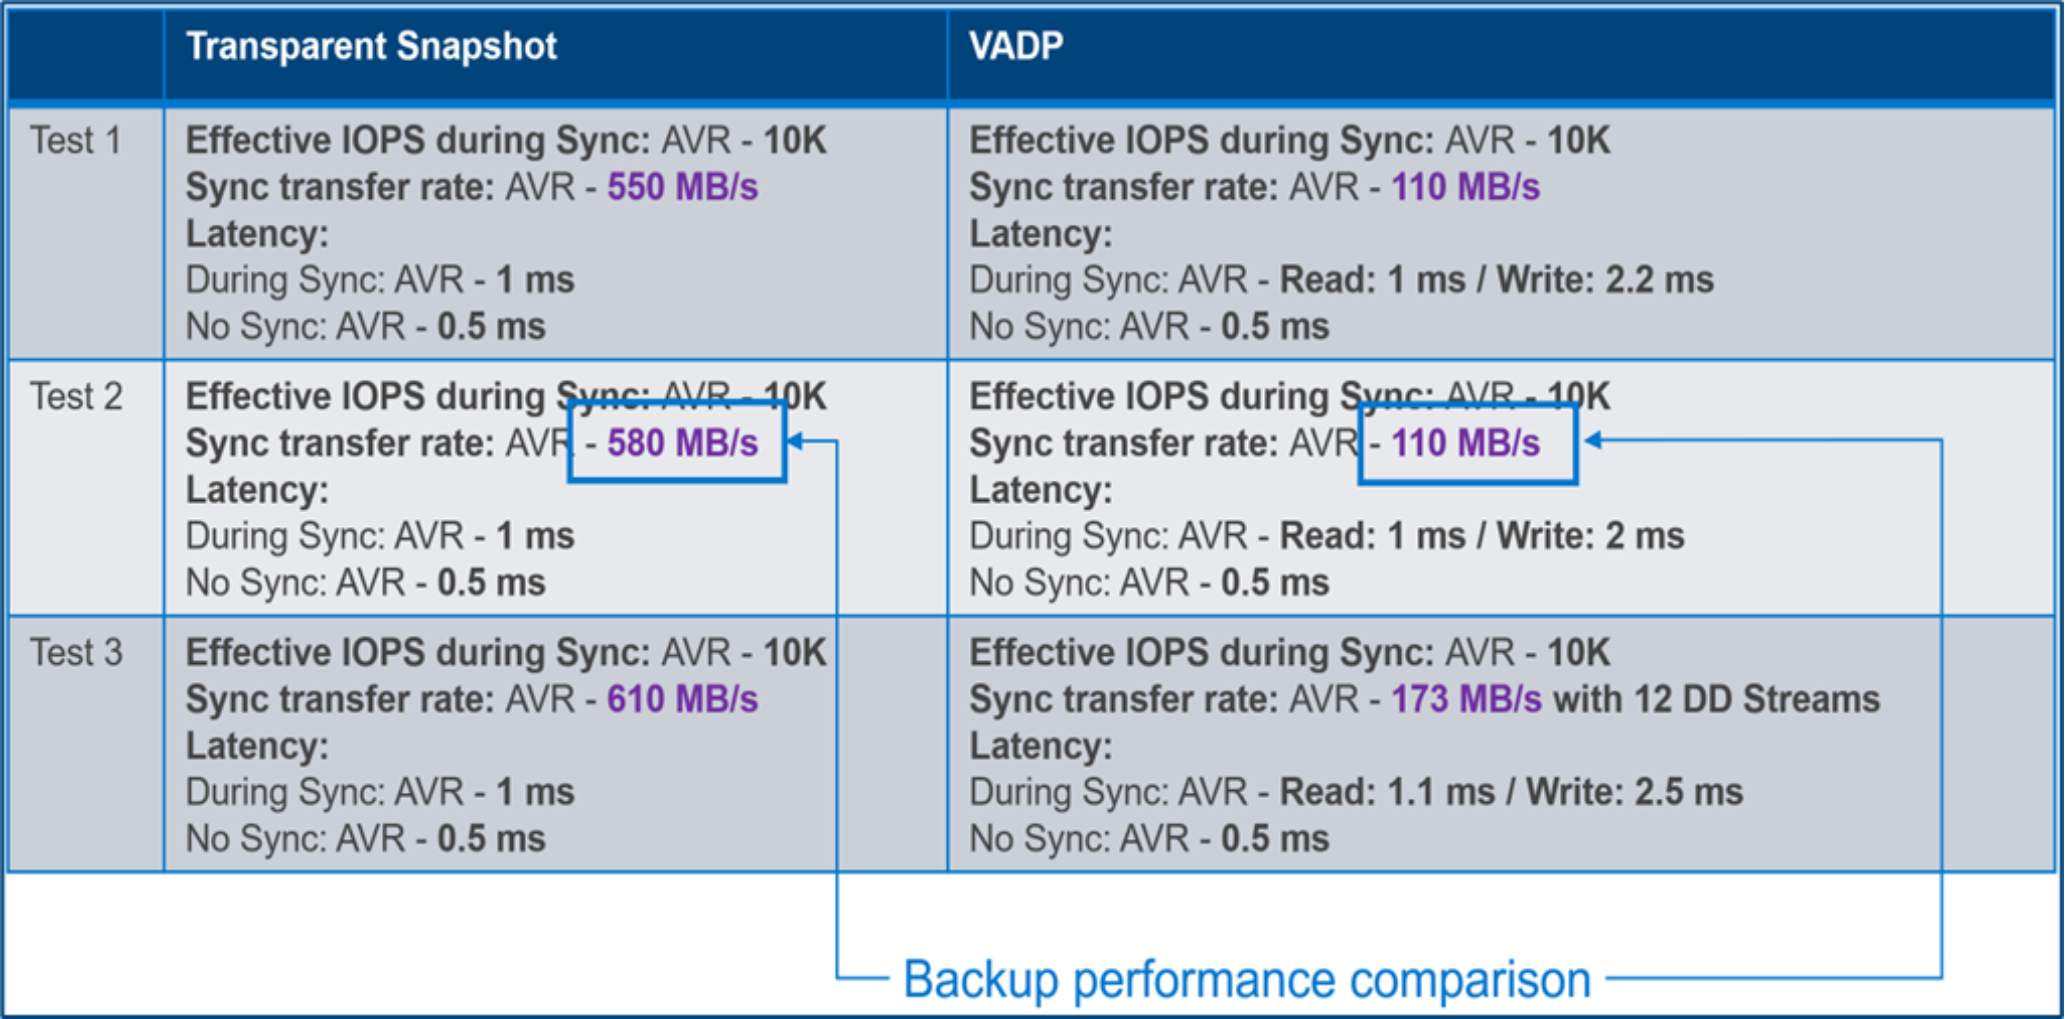 Table comparing throughput and latency impact of Transparent Snapshots and vADP